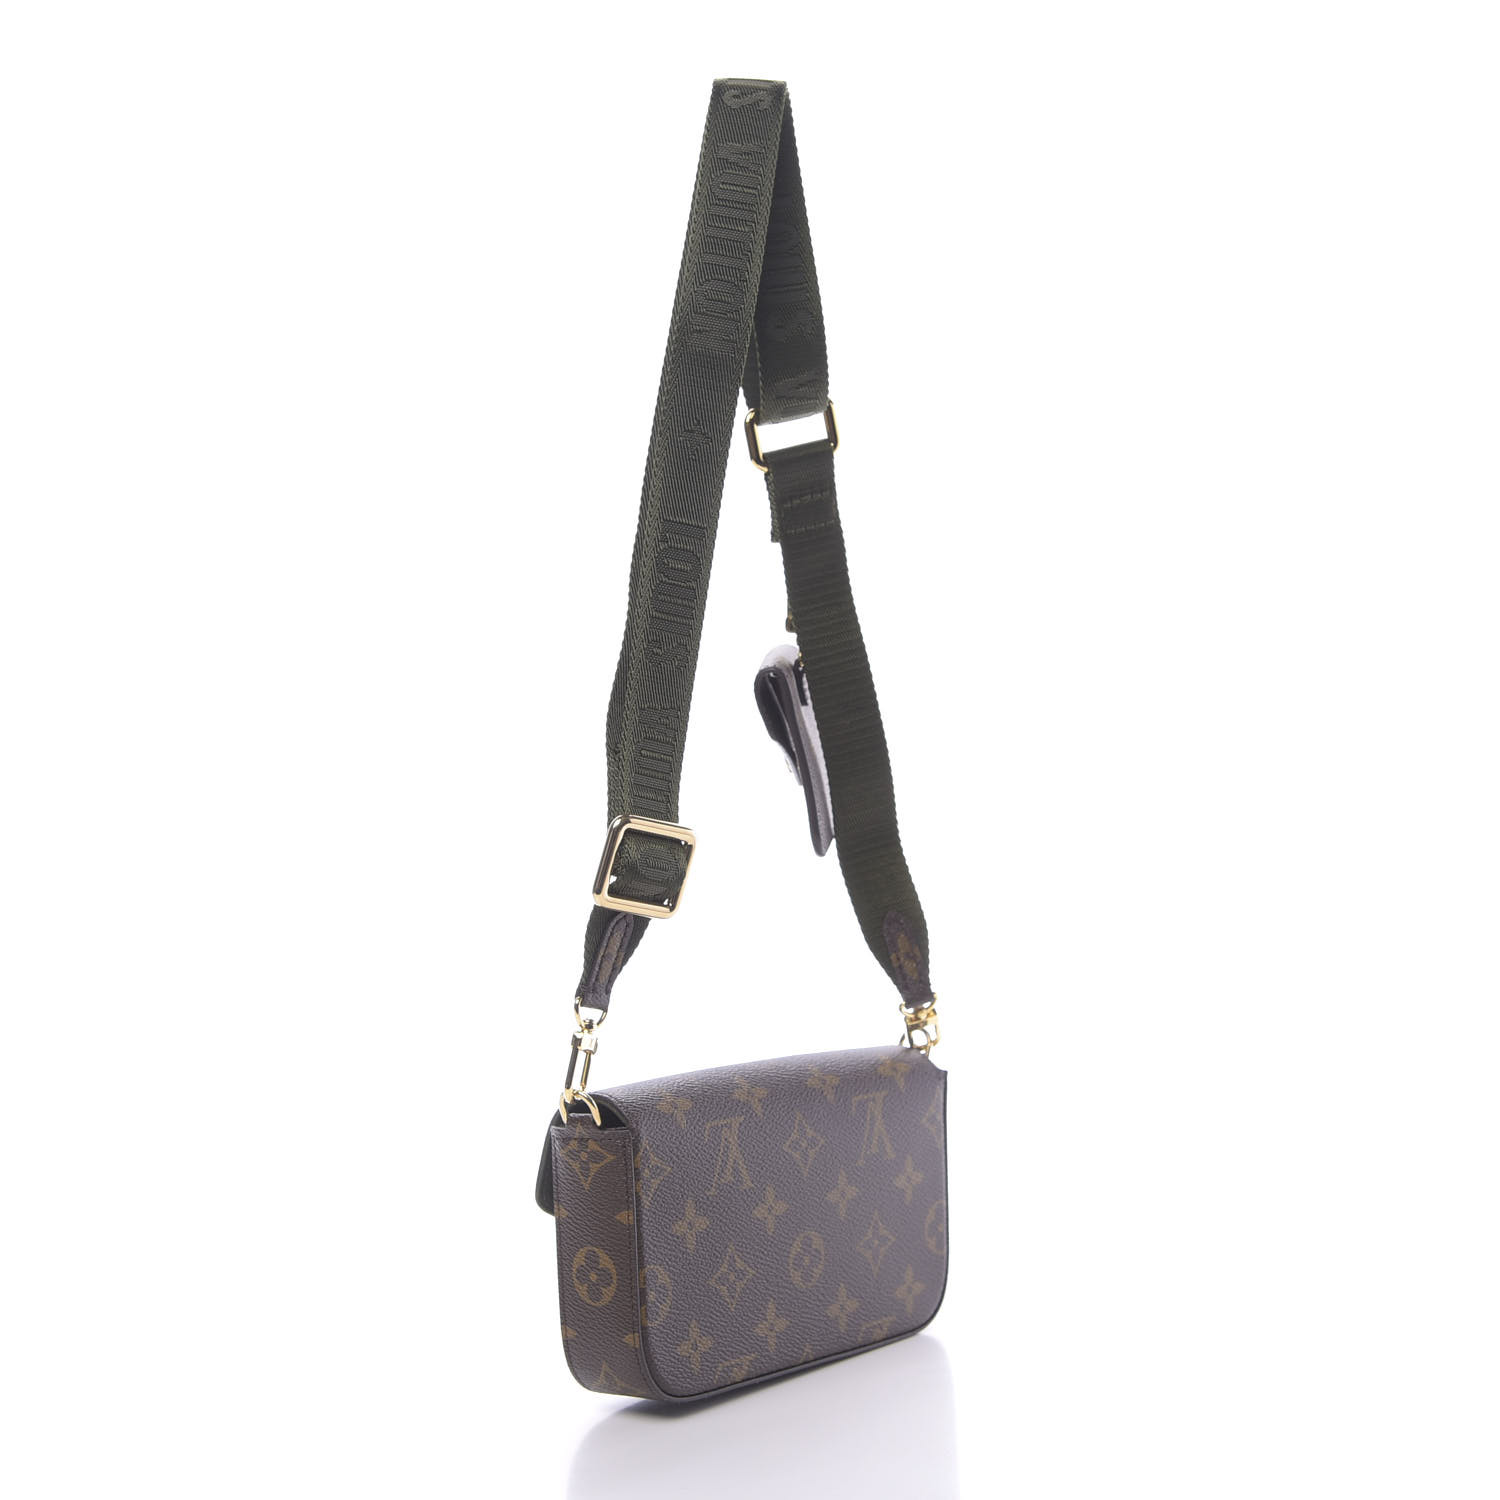 LV Felicie Strap and Go Review 